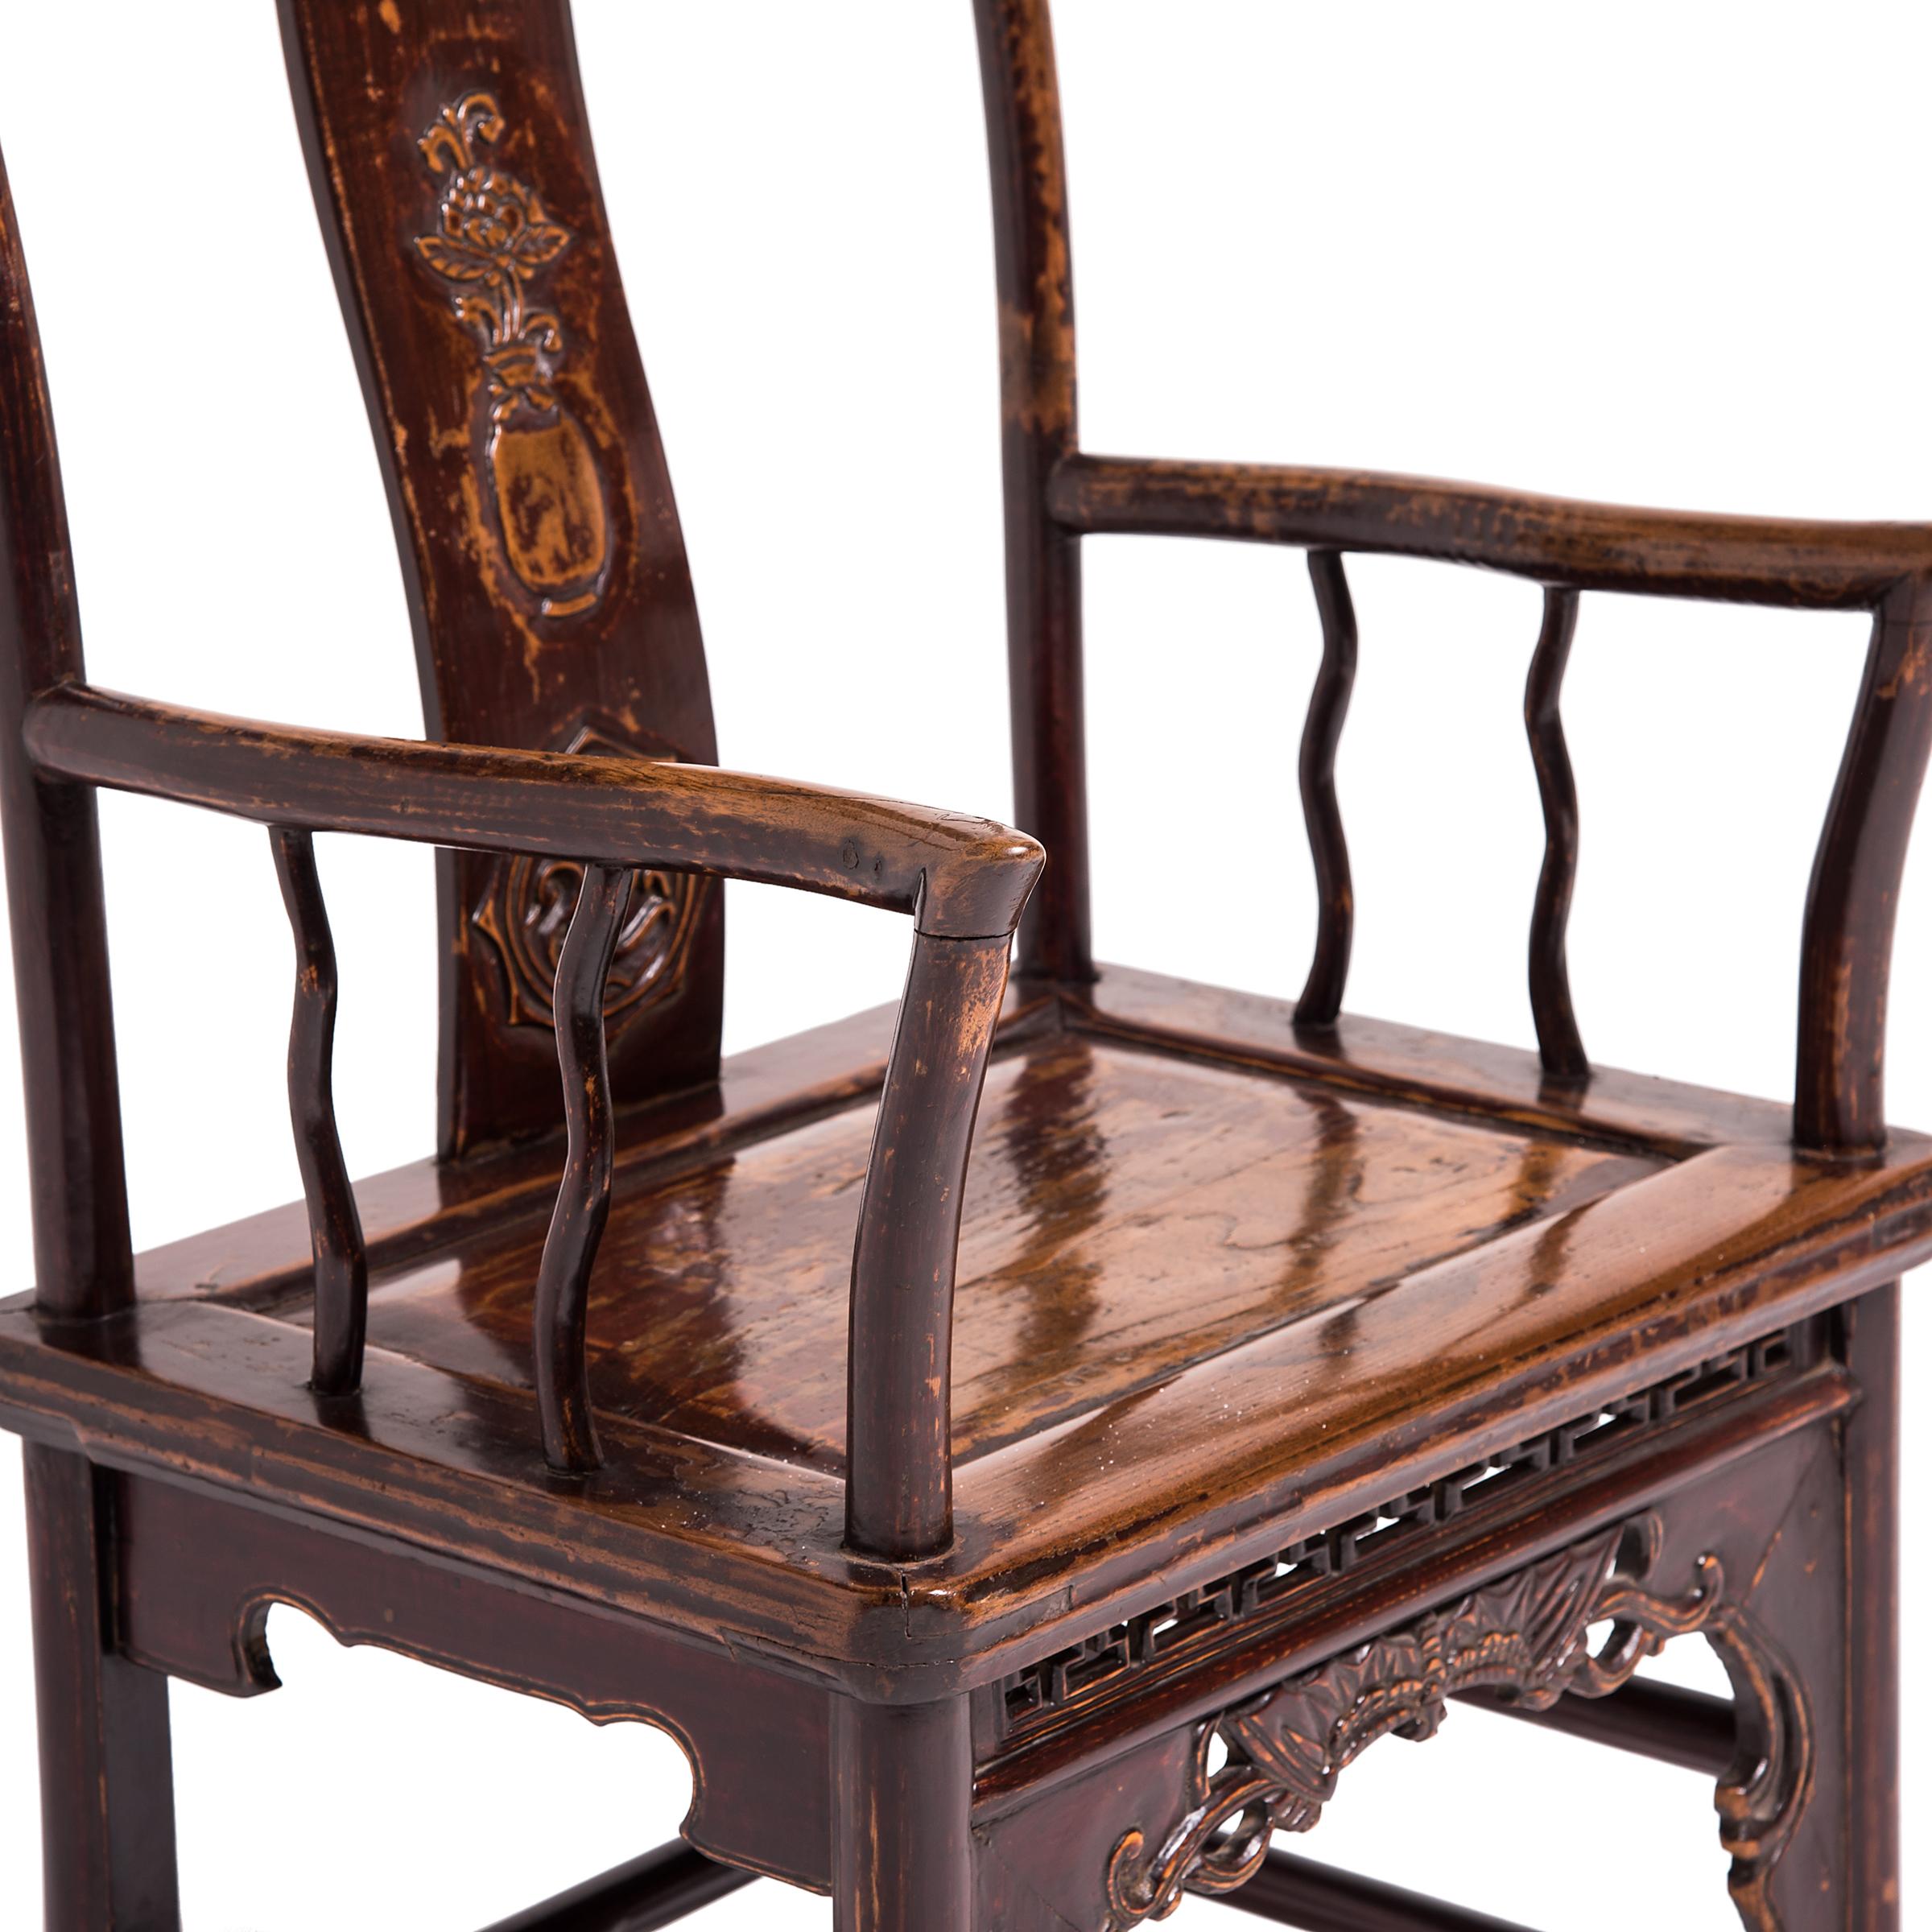 Pair of Chinese Southern Administrator's Chairs, c. 1850 For Sale 6